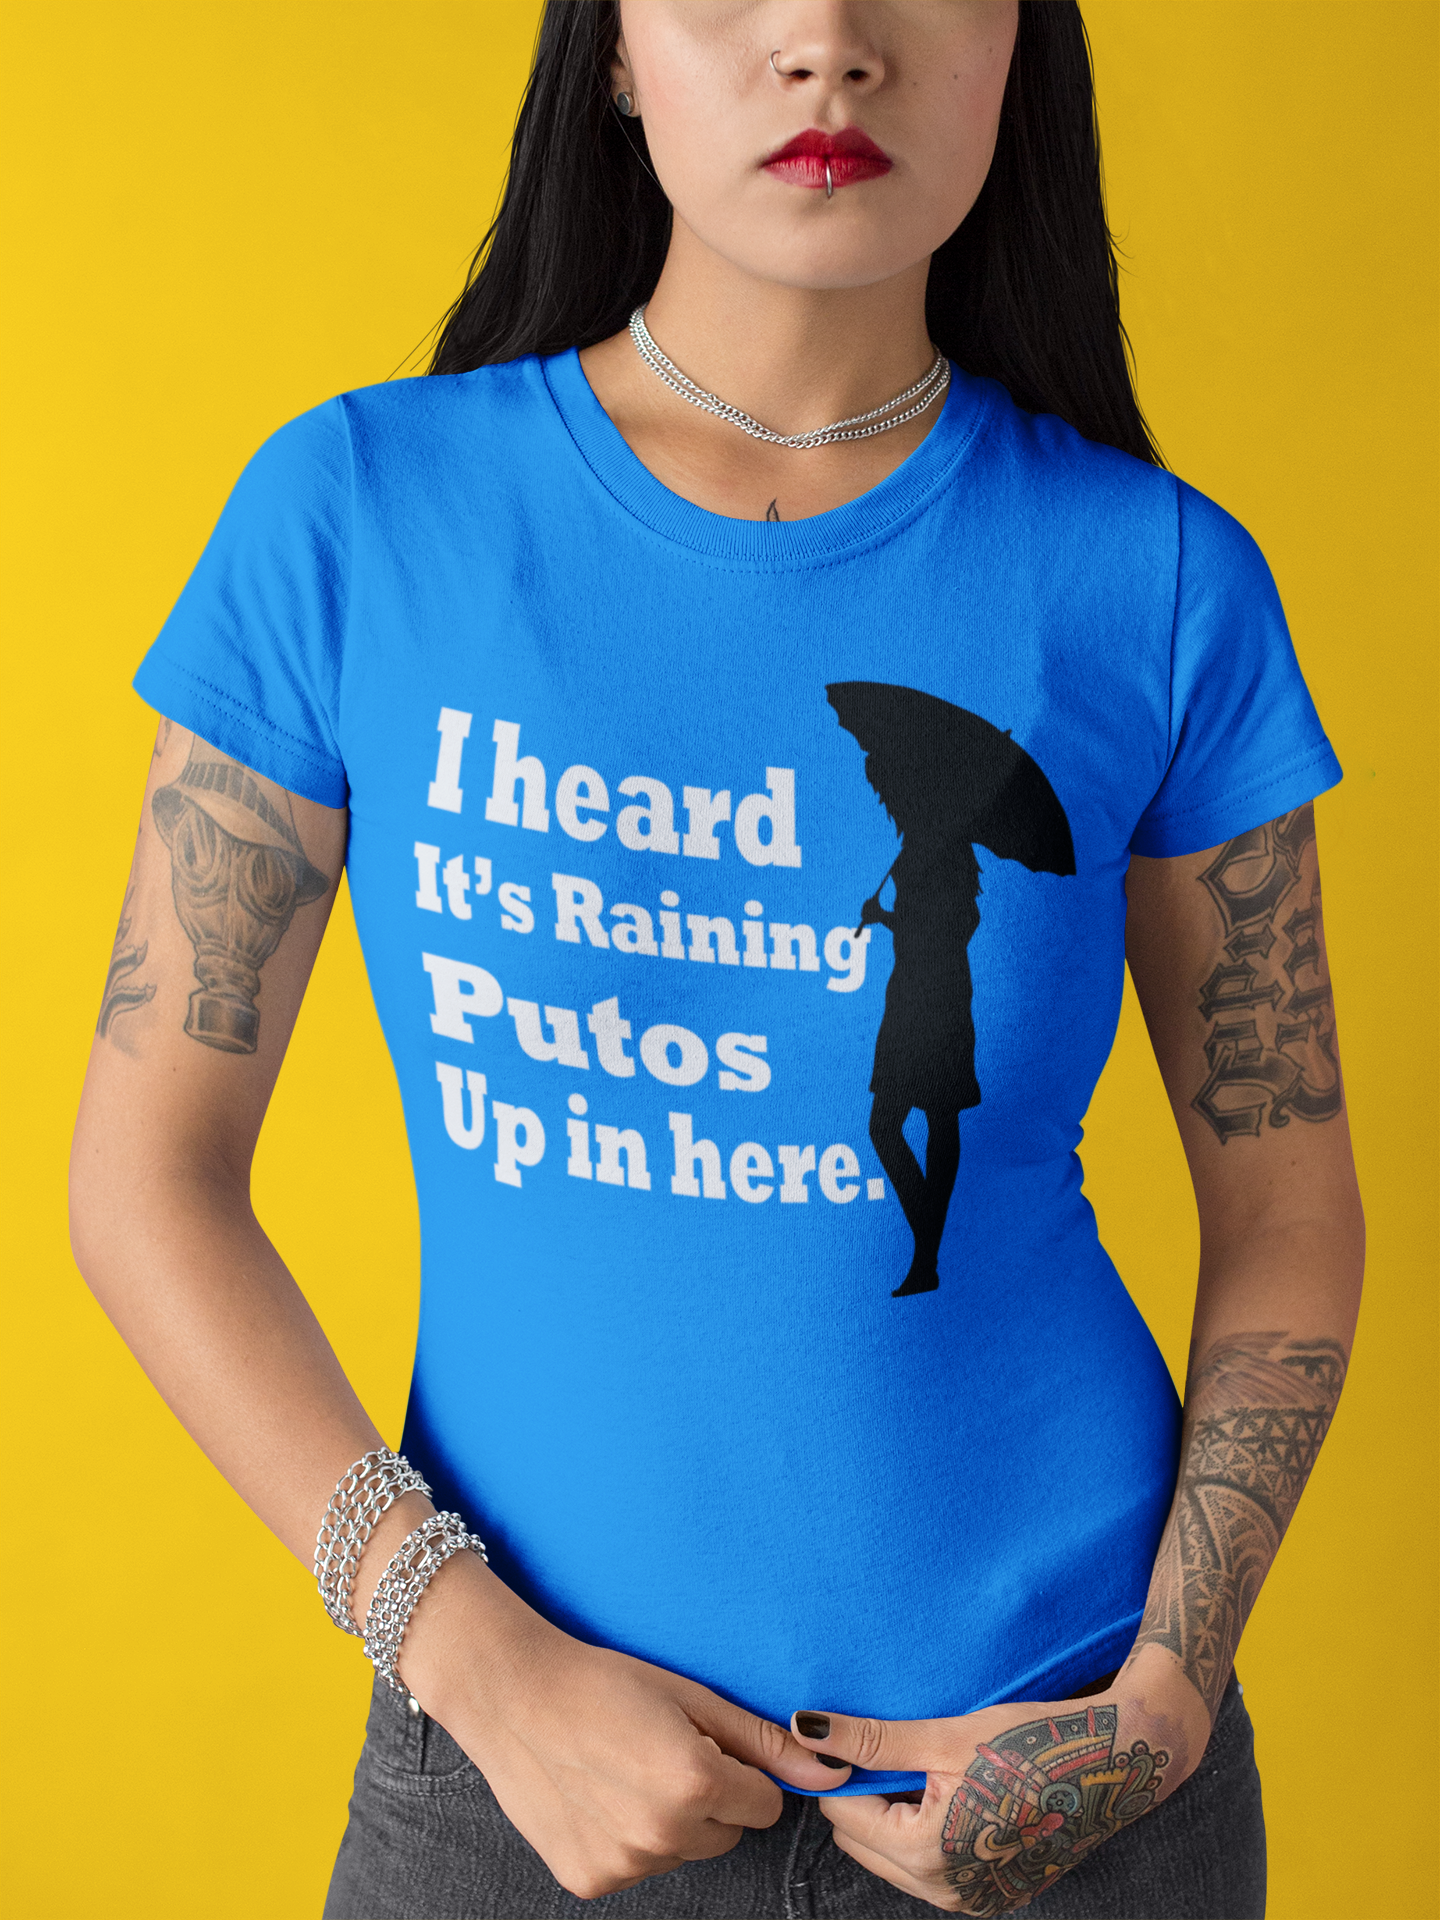 Blue T-shirt with the text, "I heard it's raining putos up in here" in white ink and a shadow woman holding an umbrella in black. This sassy tee comes in sizes small thru 4XL. It is available at www.sanchezhere.com